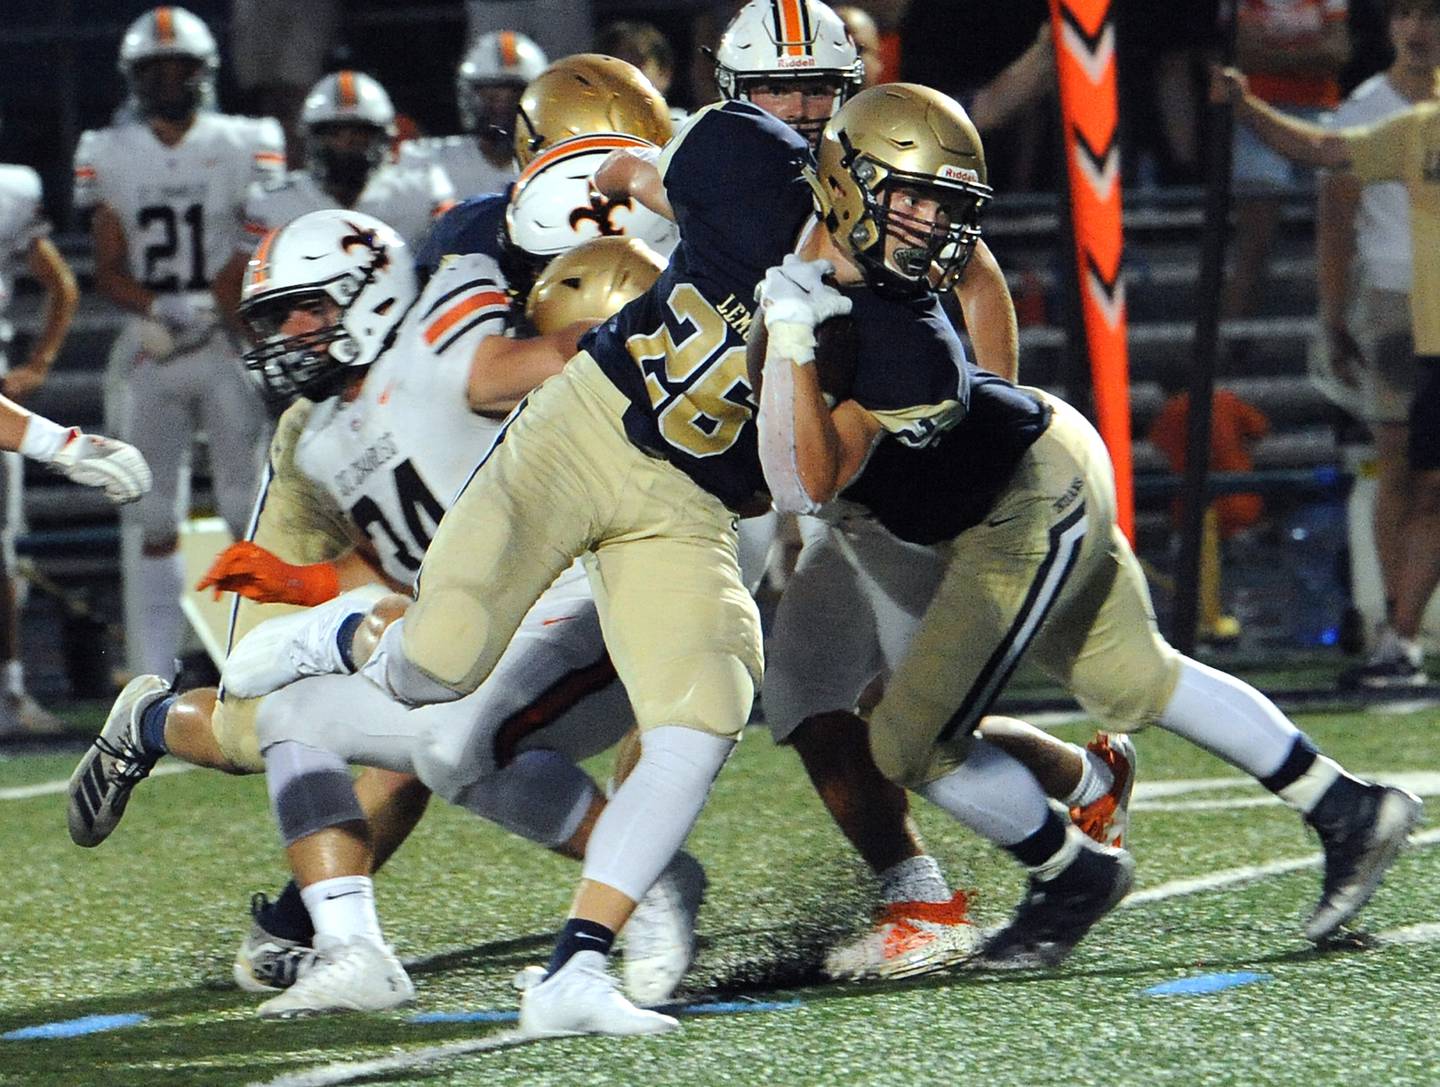 Lemont runningback Albert Kunickis (26) breaks through the St. Charles East defensive line and goes on to score the first touchdown during a varsity football game at Lemont High School on Friday.